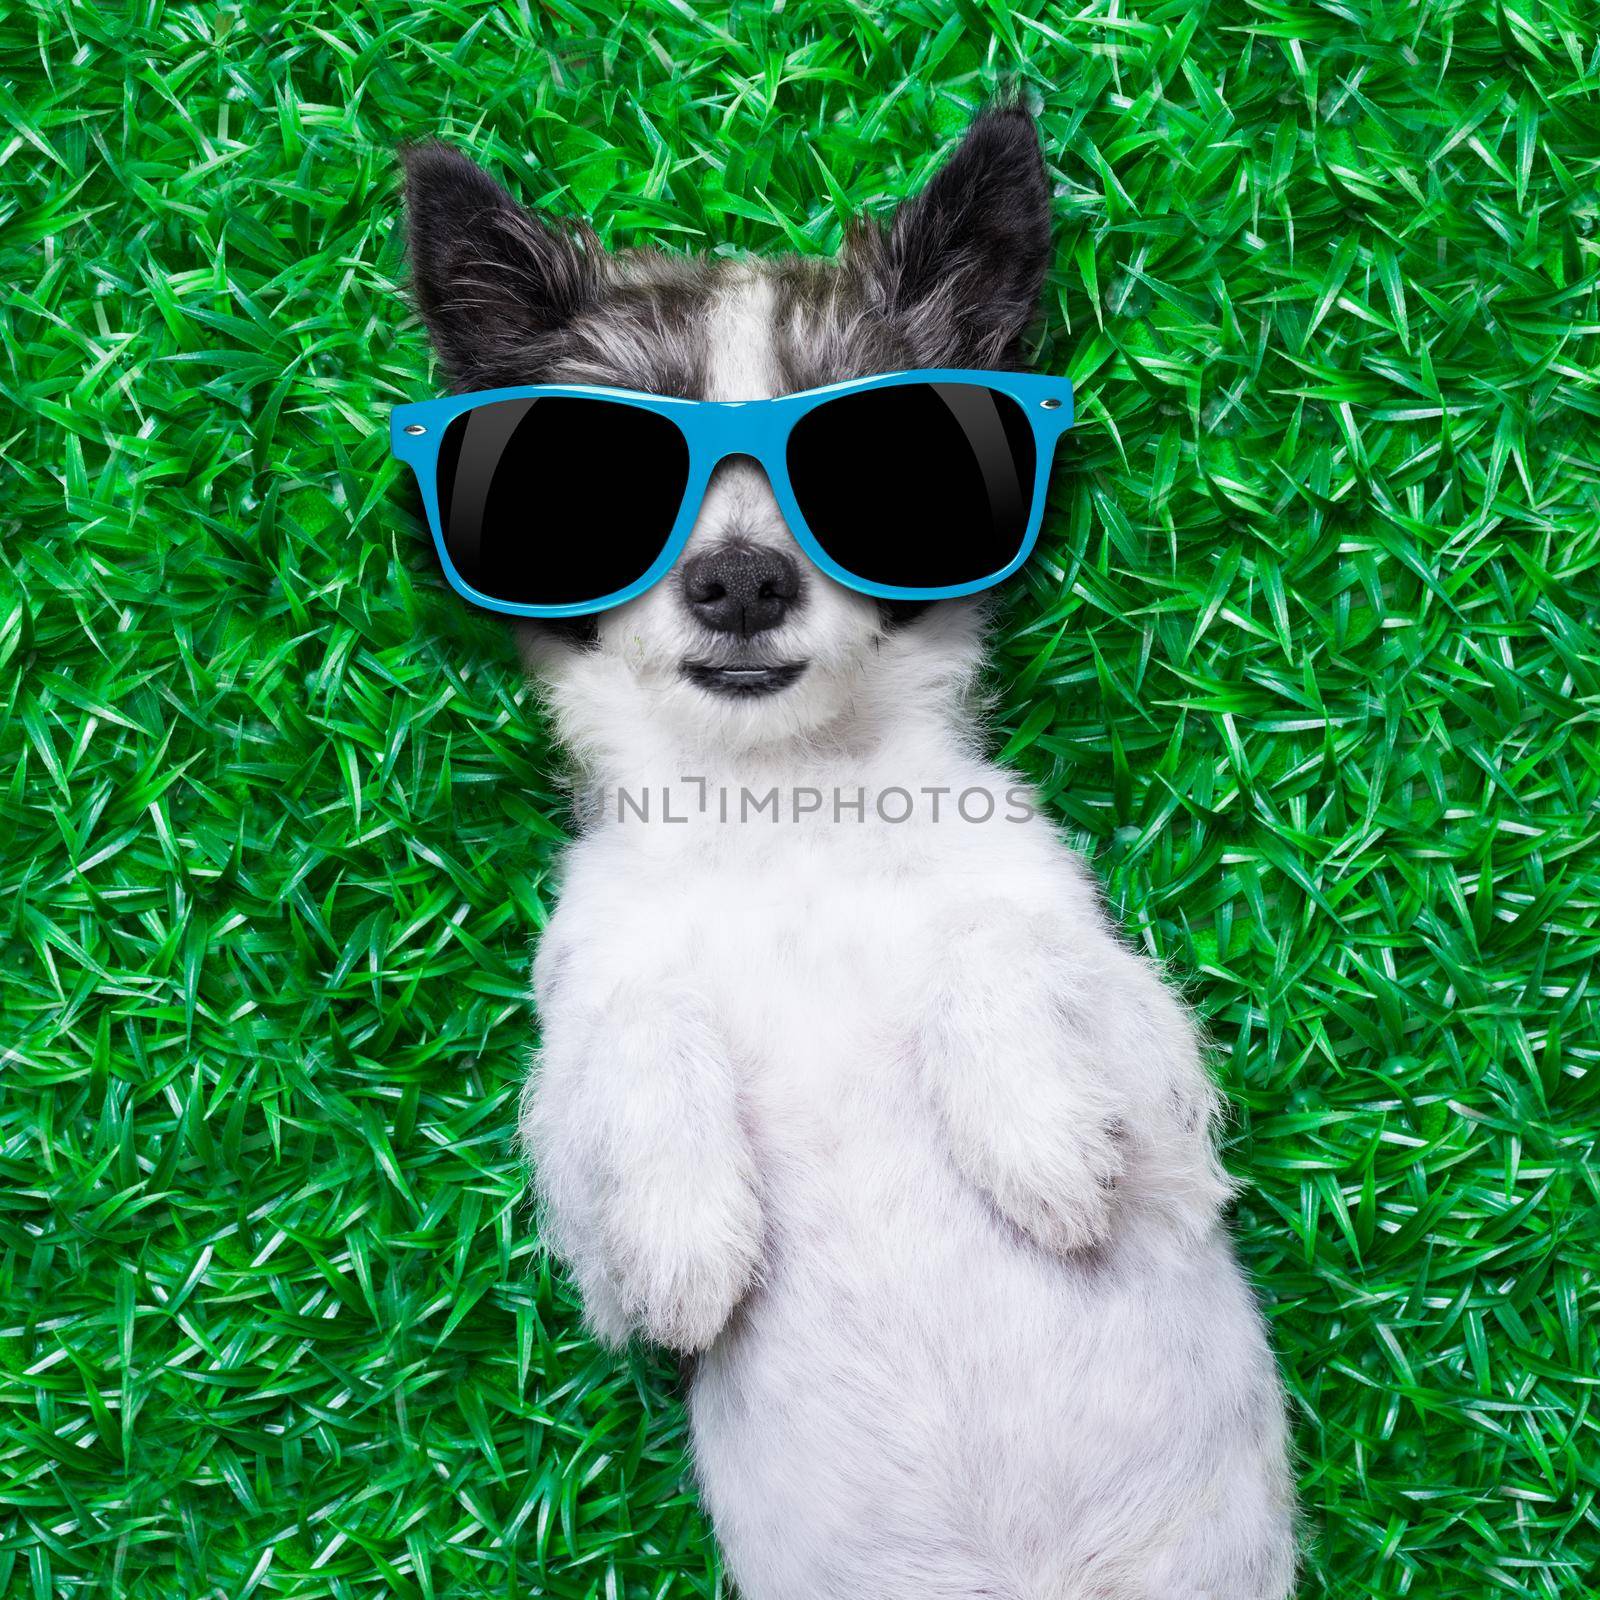 dog lying on grass with blue sunglasses